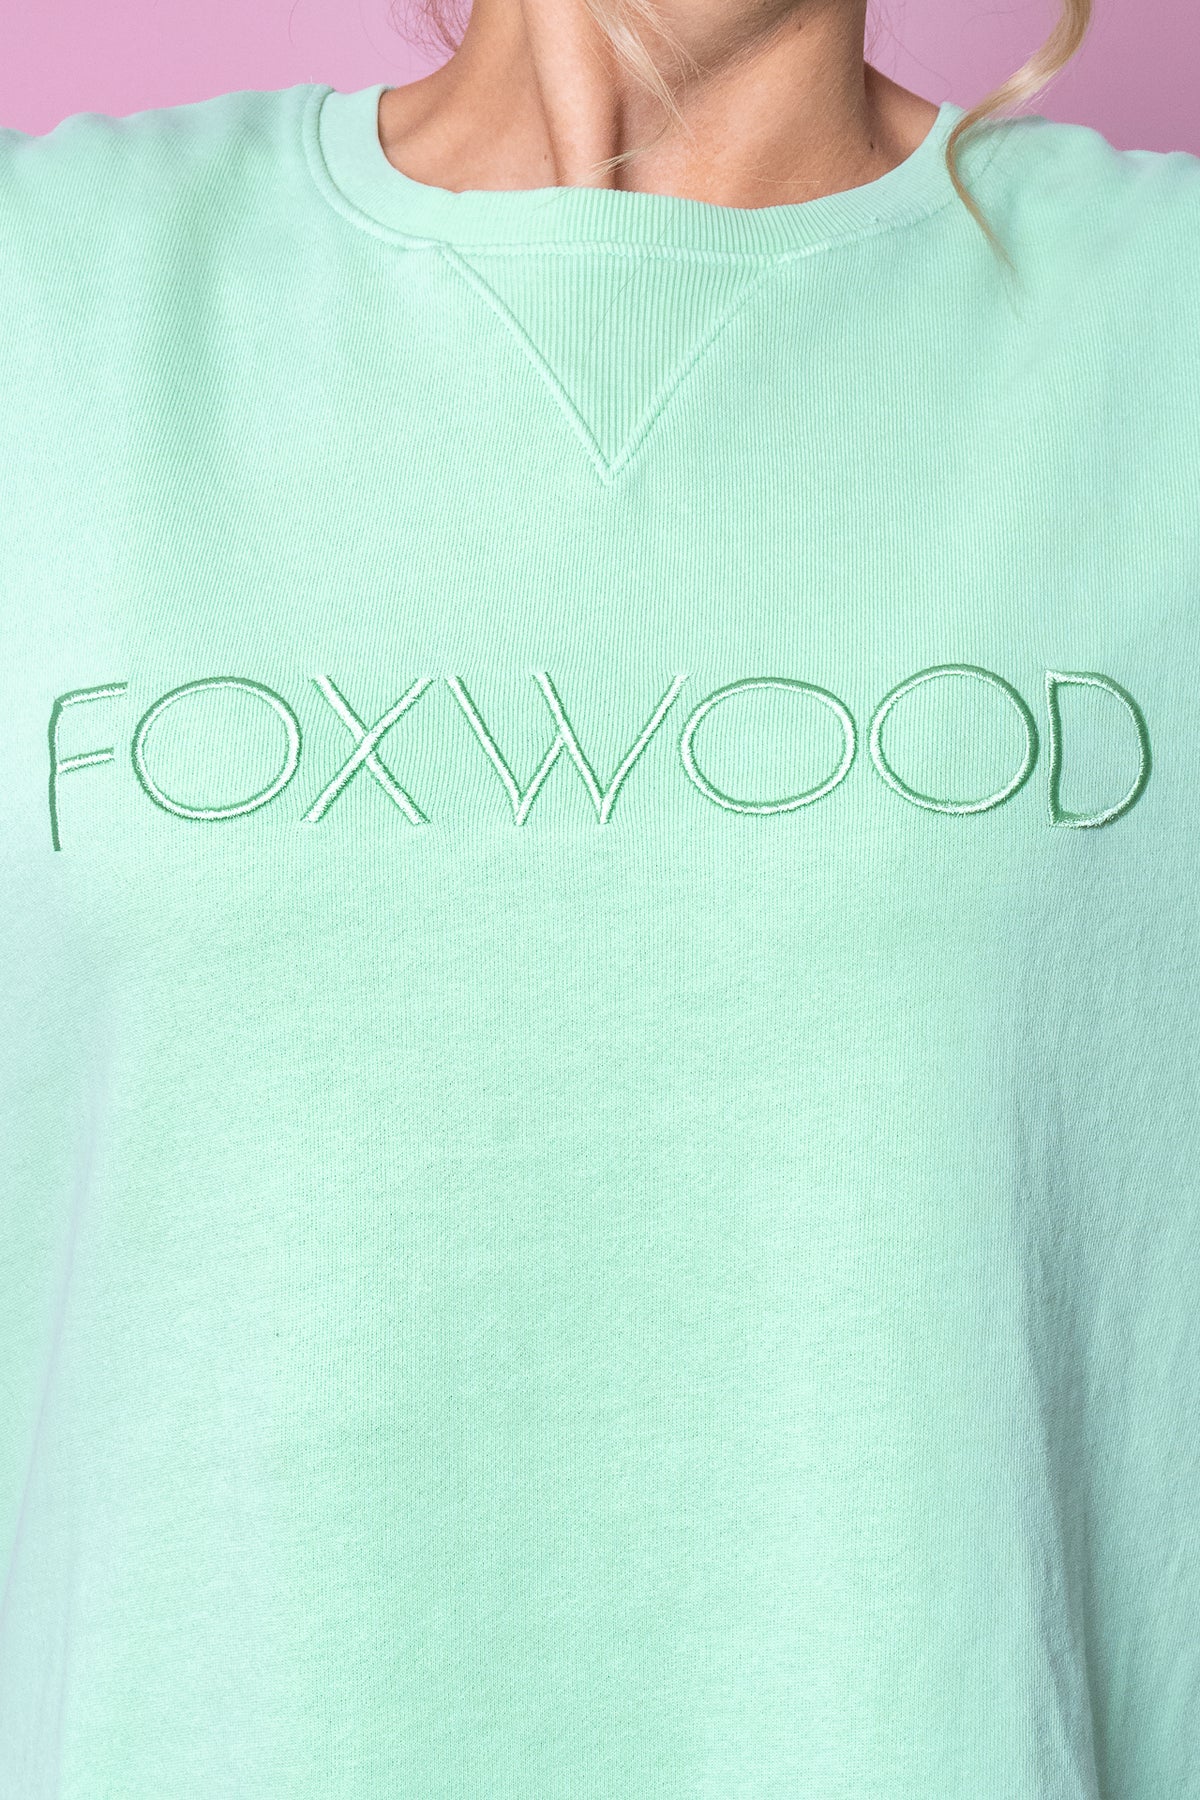 Simplified Crew in Mint - Foxwood